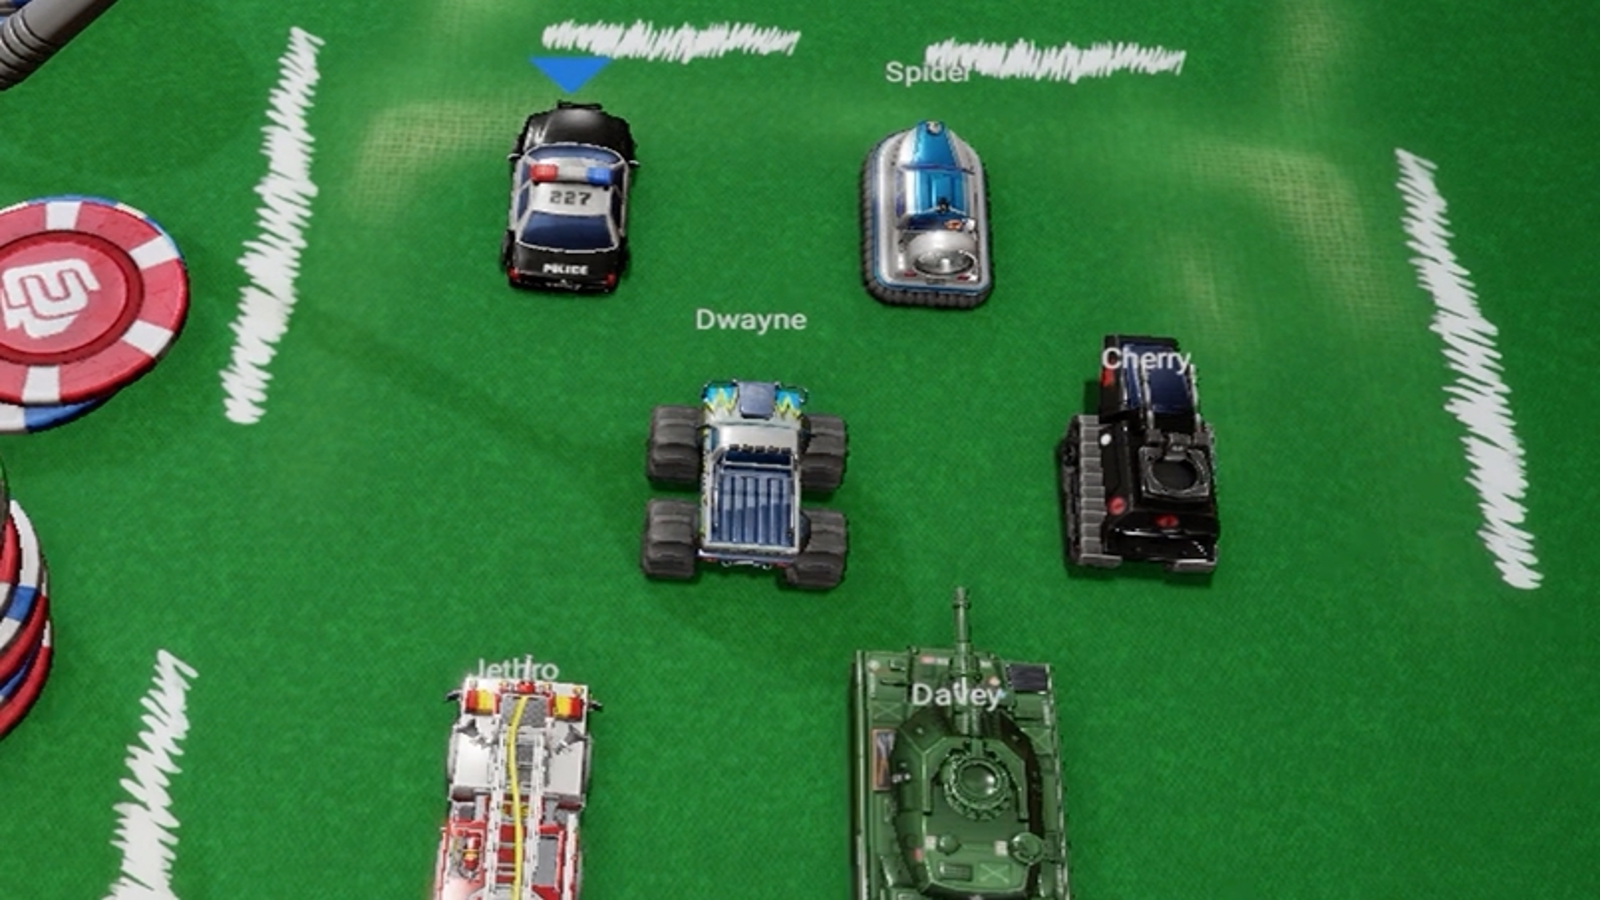 https://assetsio.reedpopcdn.com/micro-machines-world-series-review-1498743368264.jpg?width=1600&height=900&fit=crop&quality=100&format=png&enable=upscale&auto=webp